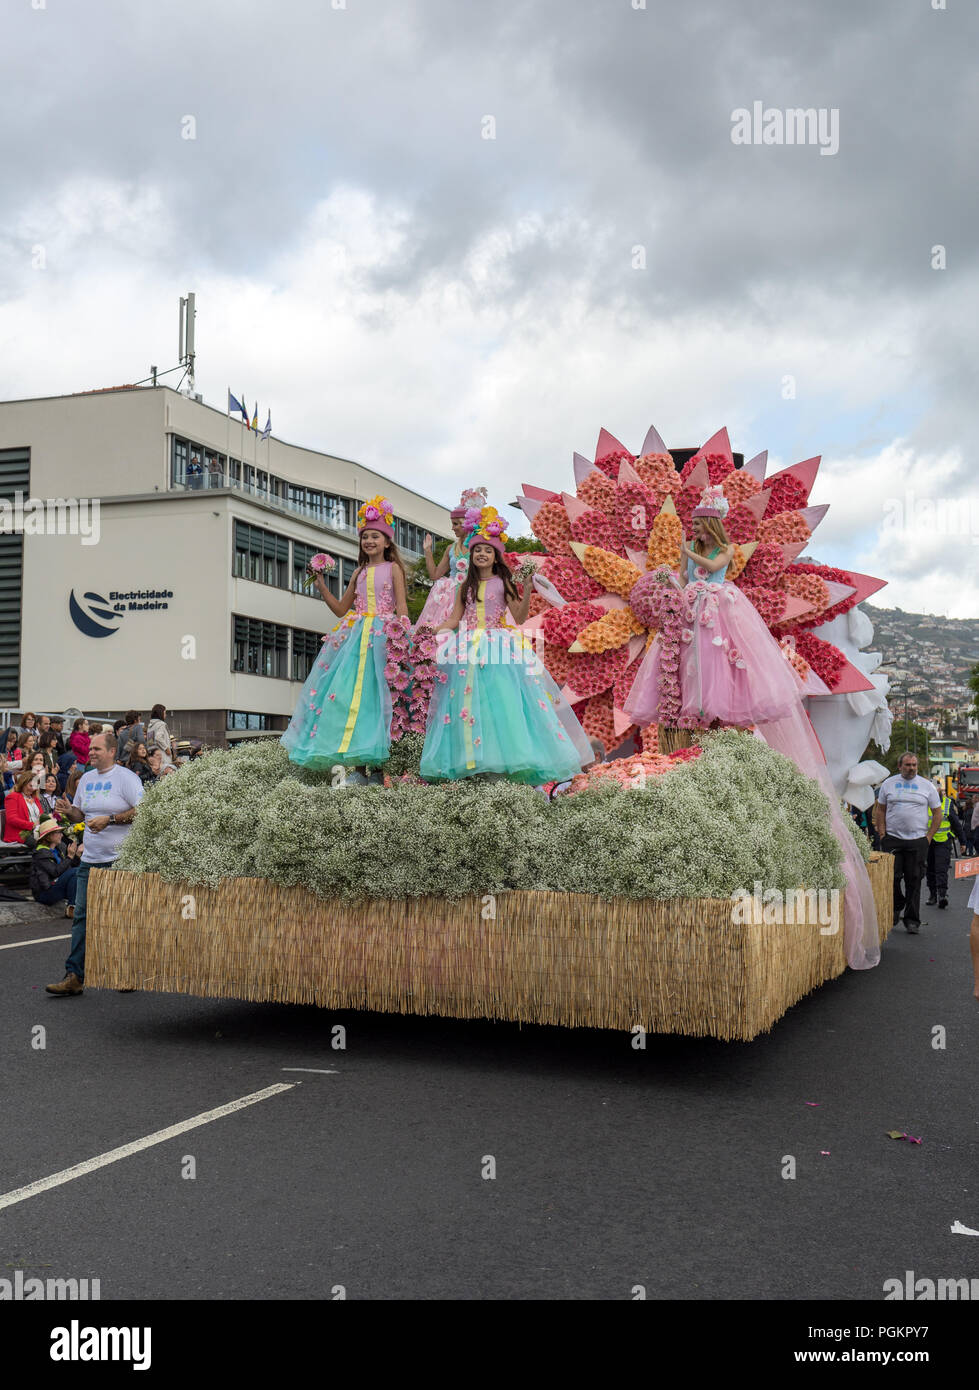 Funchal; Madeira; Portugal - April 22; 2018: Girls in colorful costumes on the floral float at Madeira Flower Festival Parade in Funchal on the Island Stock Photo